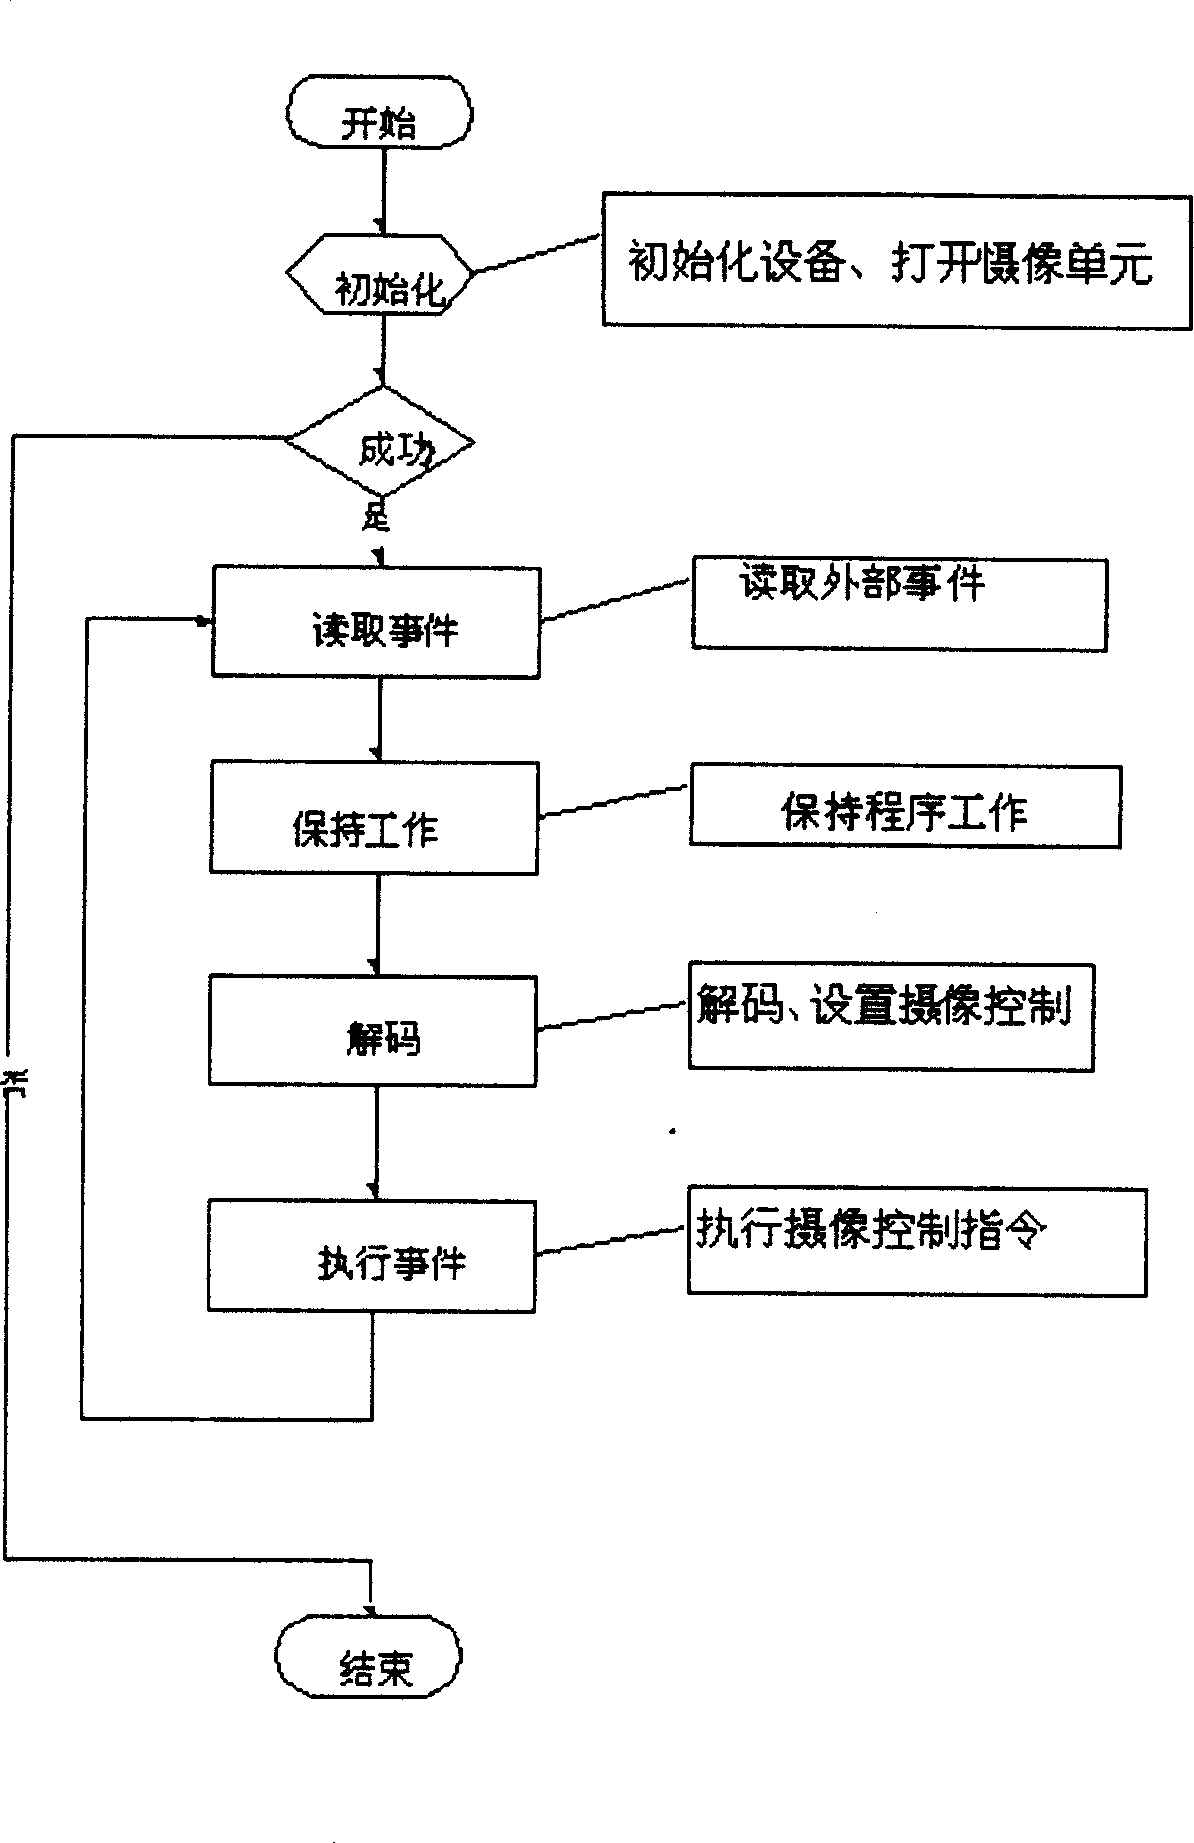 Vehicle monitor information safety system